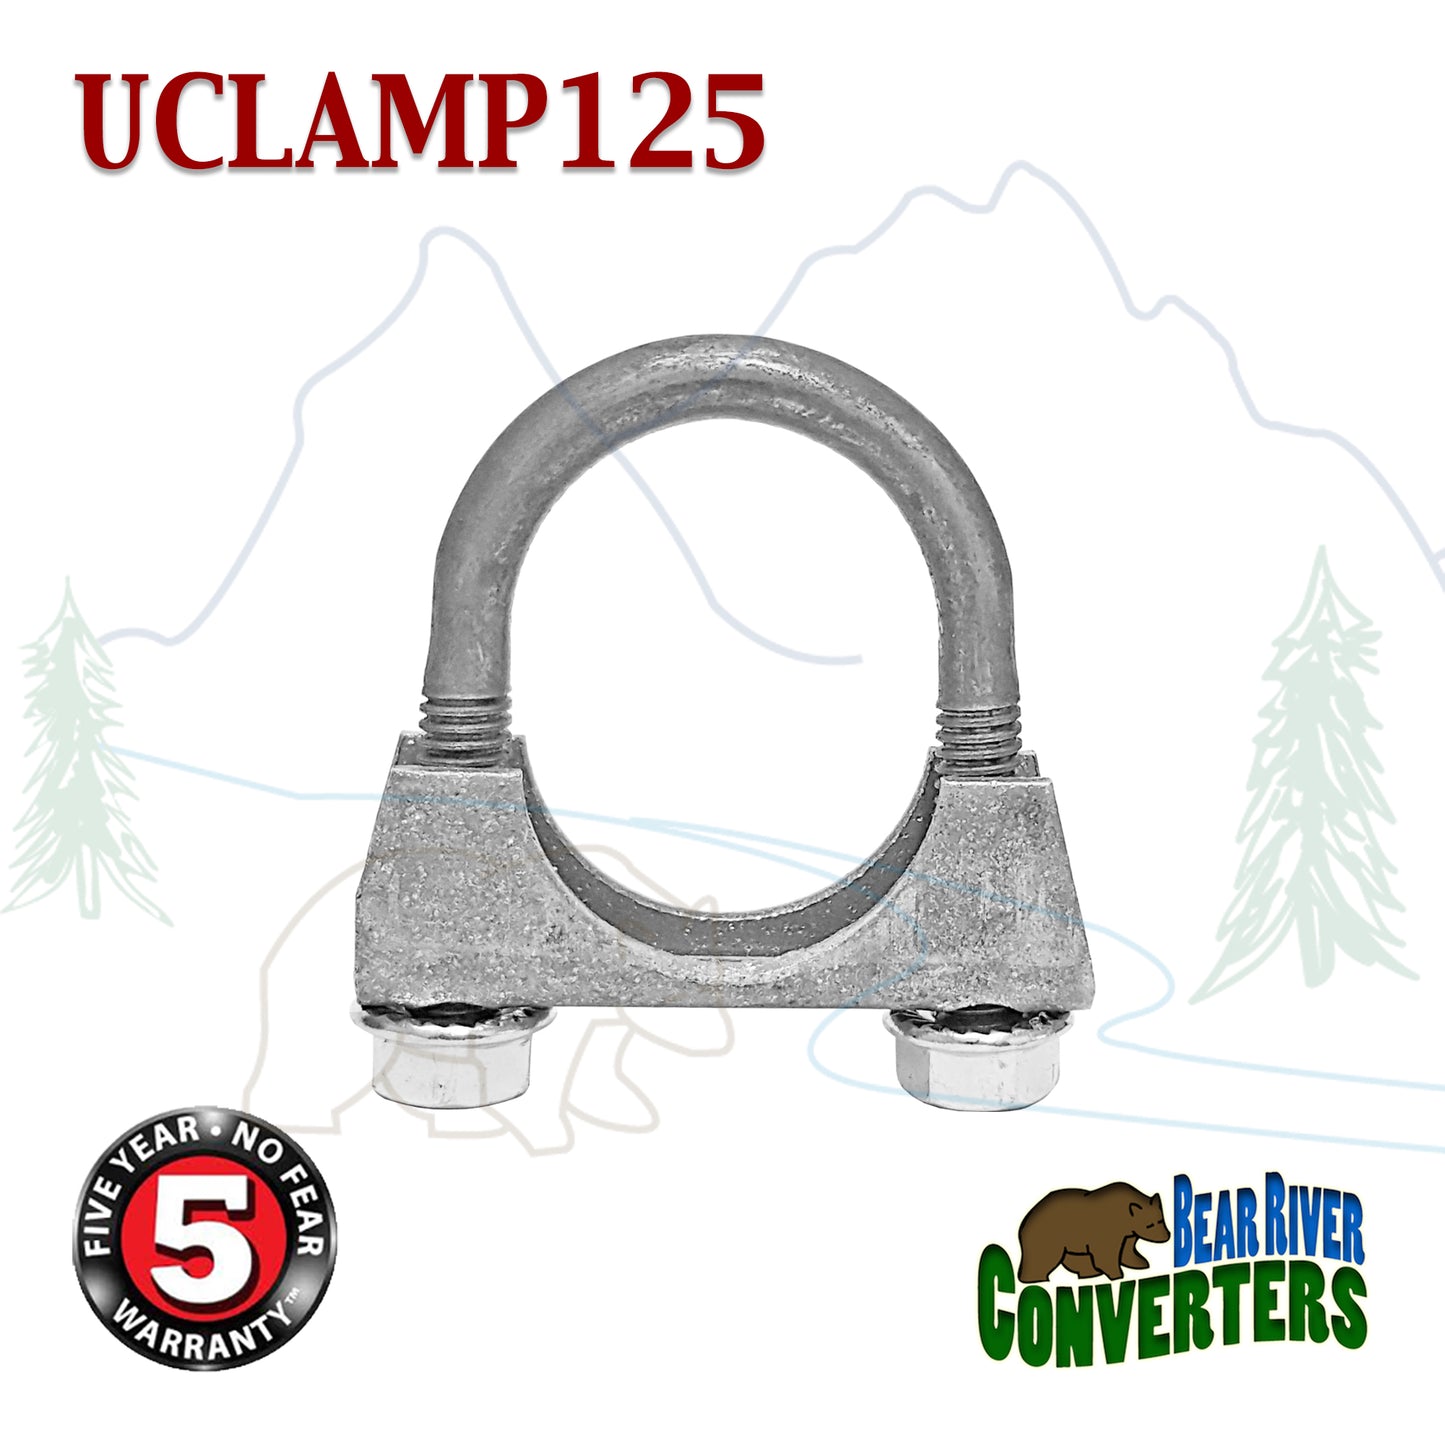 1 1/4" Exhaust Muffler Clamp U-Bolt Saddle Style For 1.25" Pipe